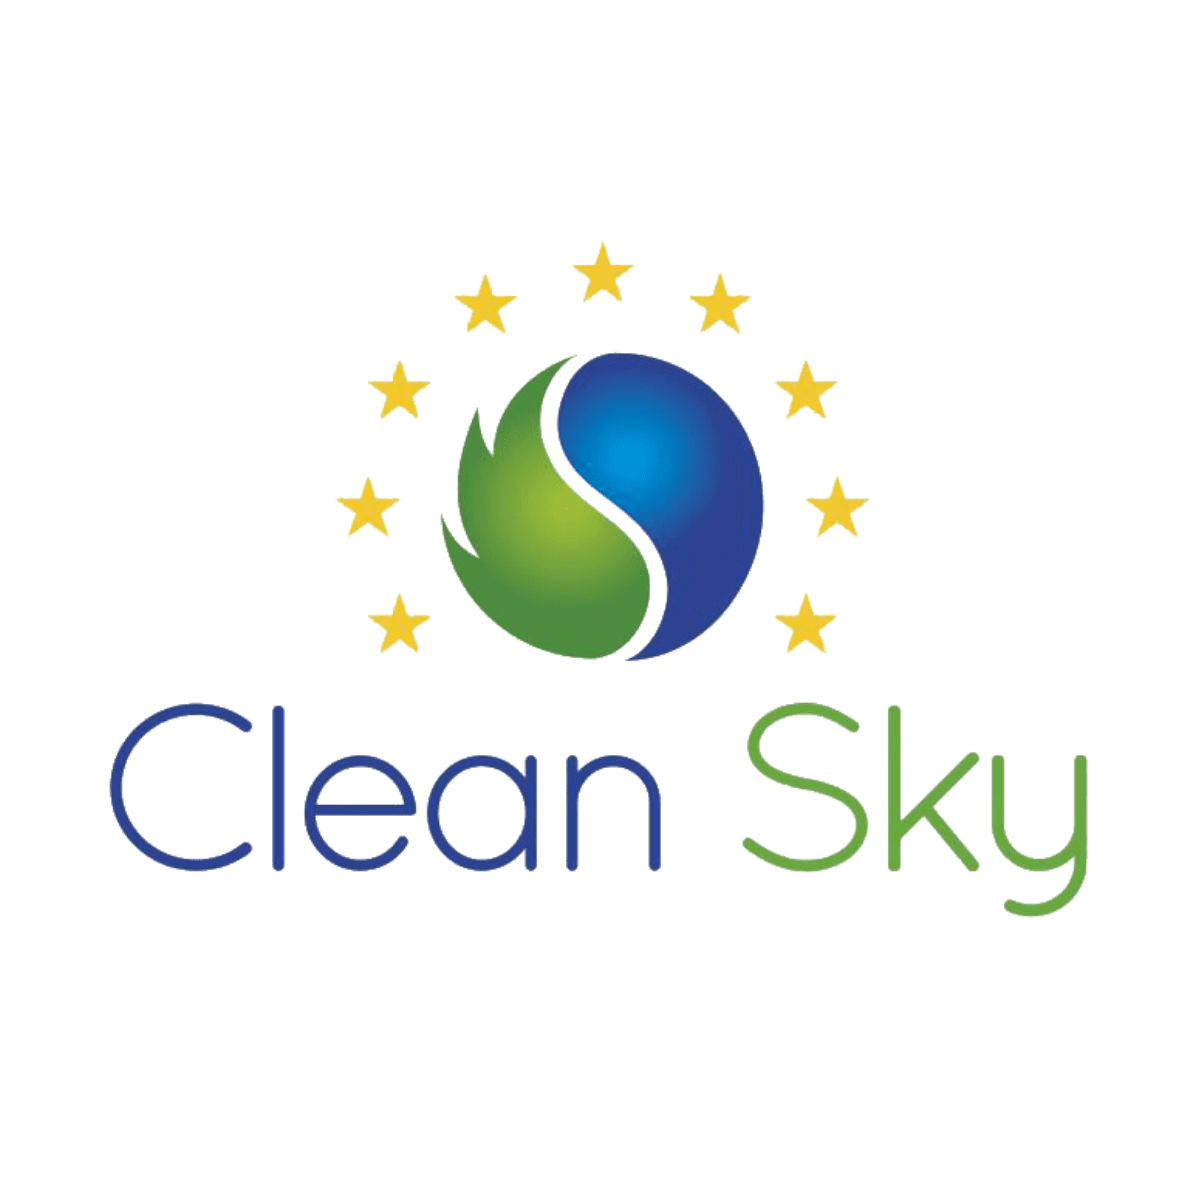 Project Clean Sky Aircraft Paint Riblet, Corso Magenta participated in European Clean Sky project